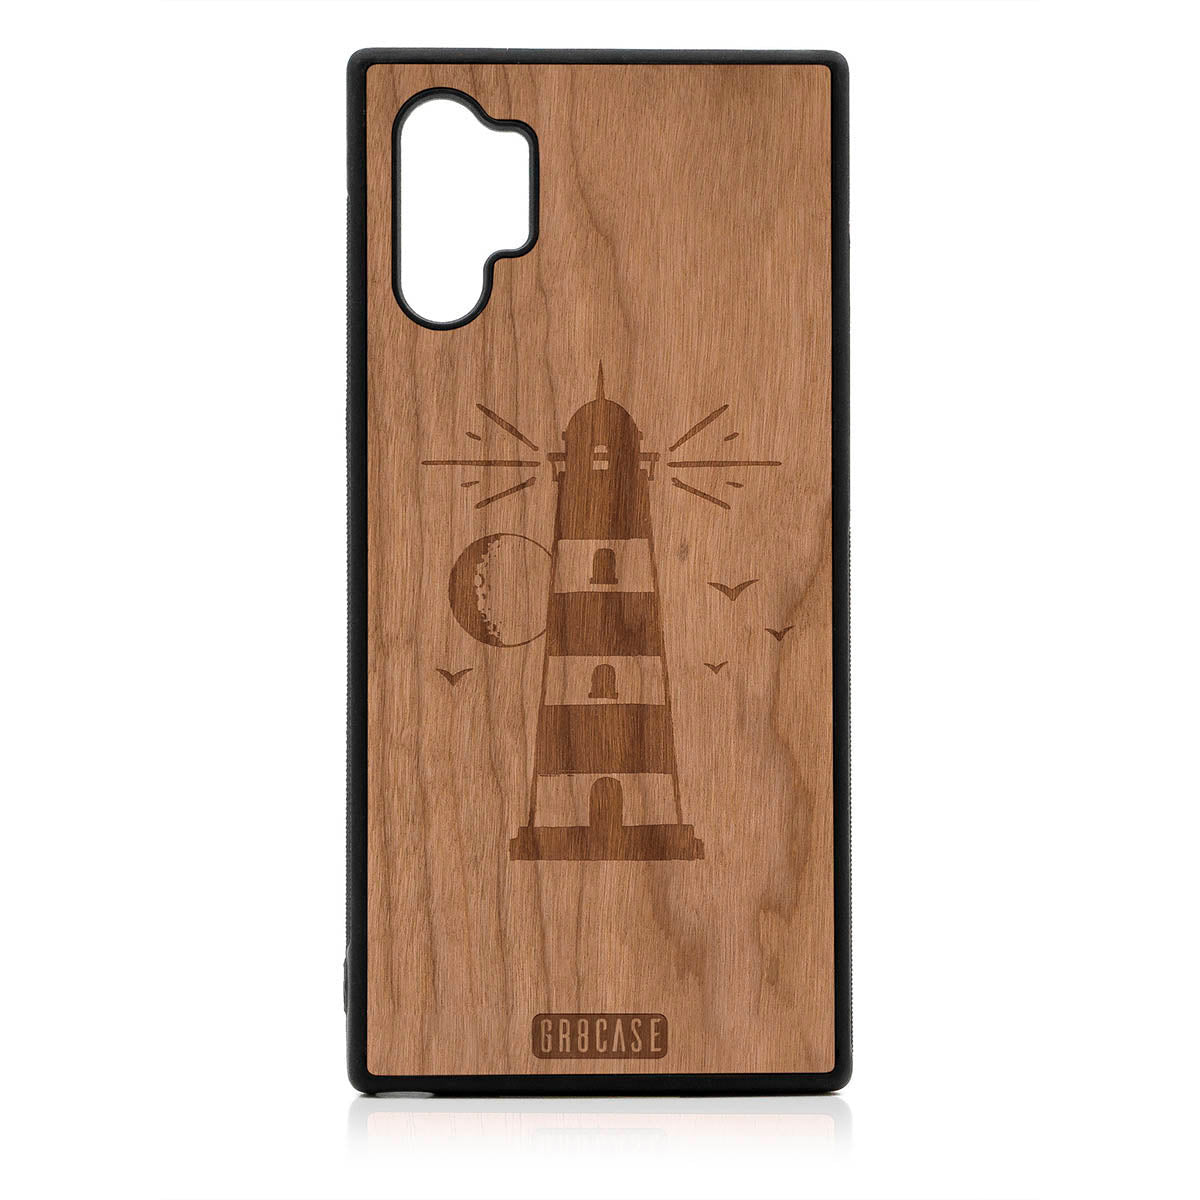 Midnight Lighthouse Design Wood Case For Samsung Galaxy Note 10 Plus